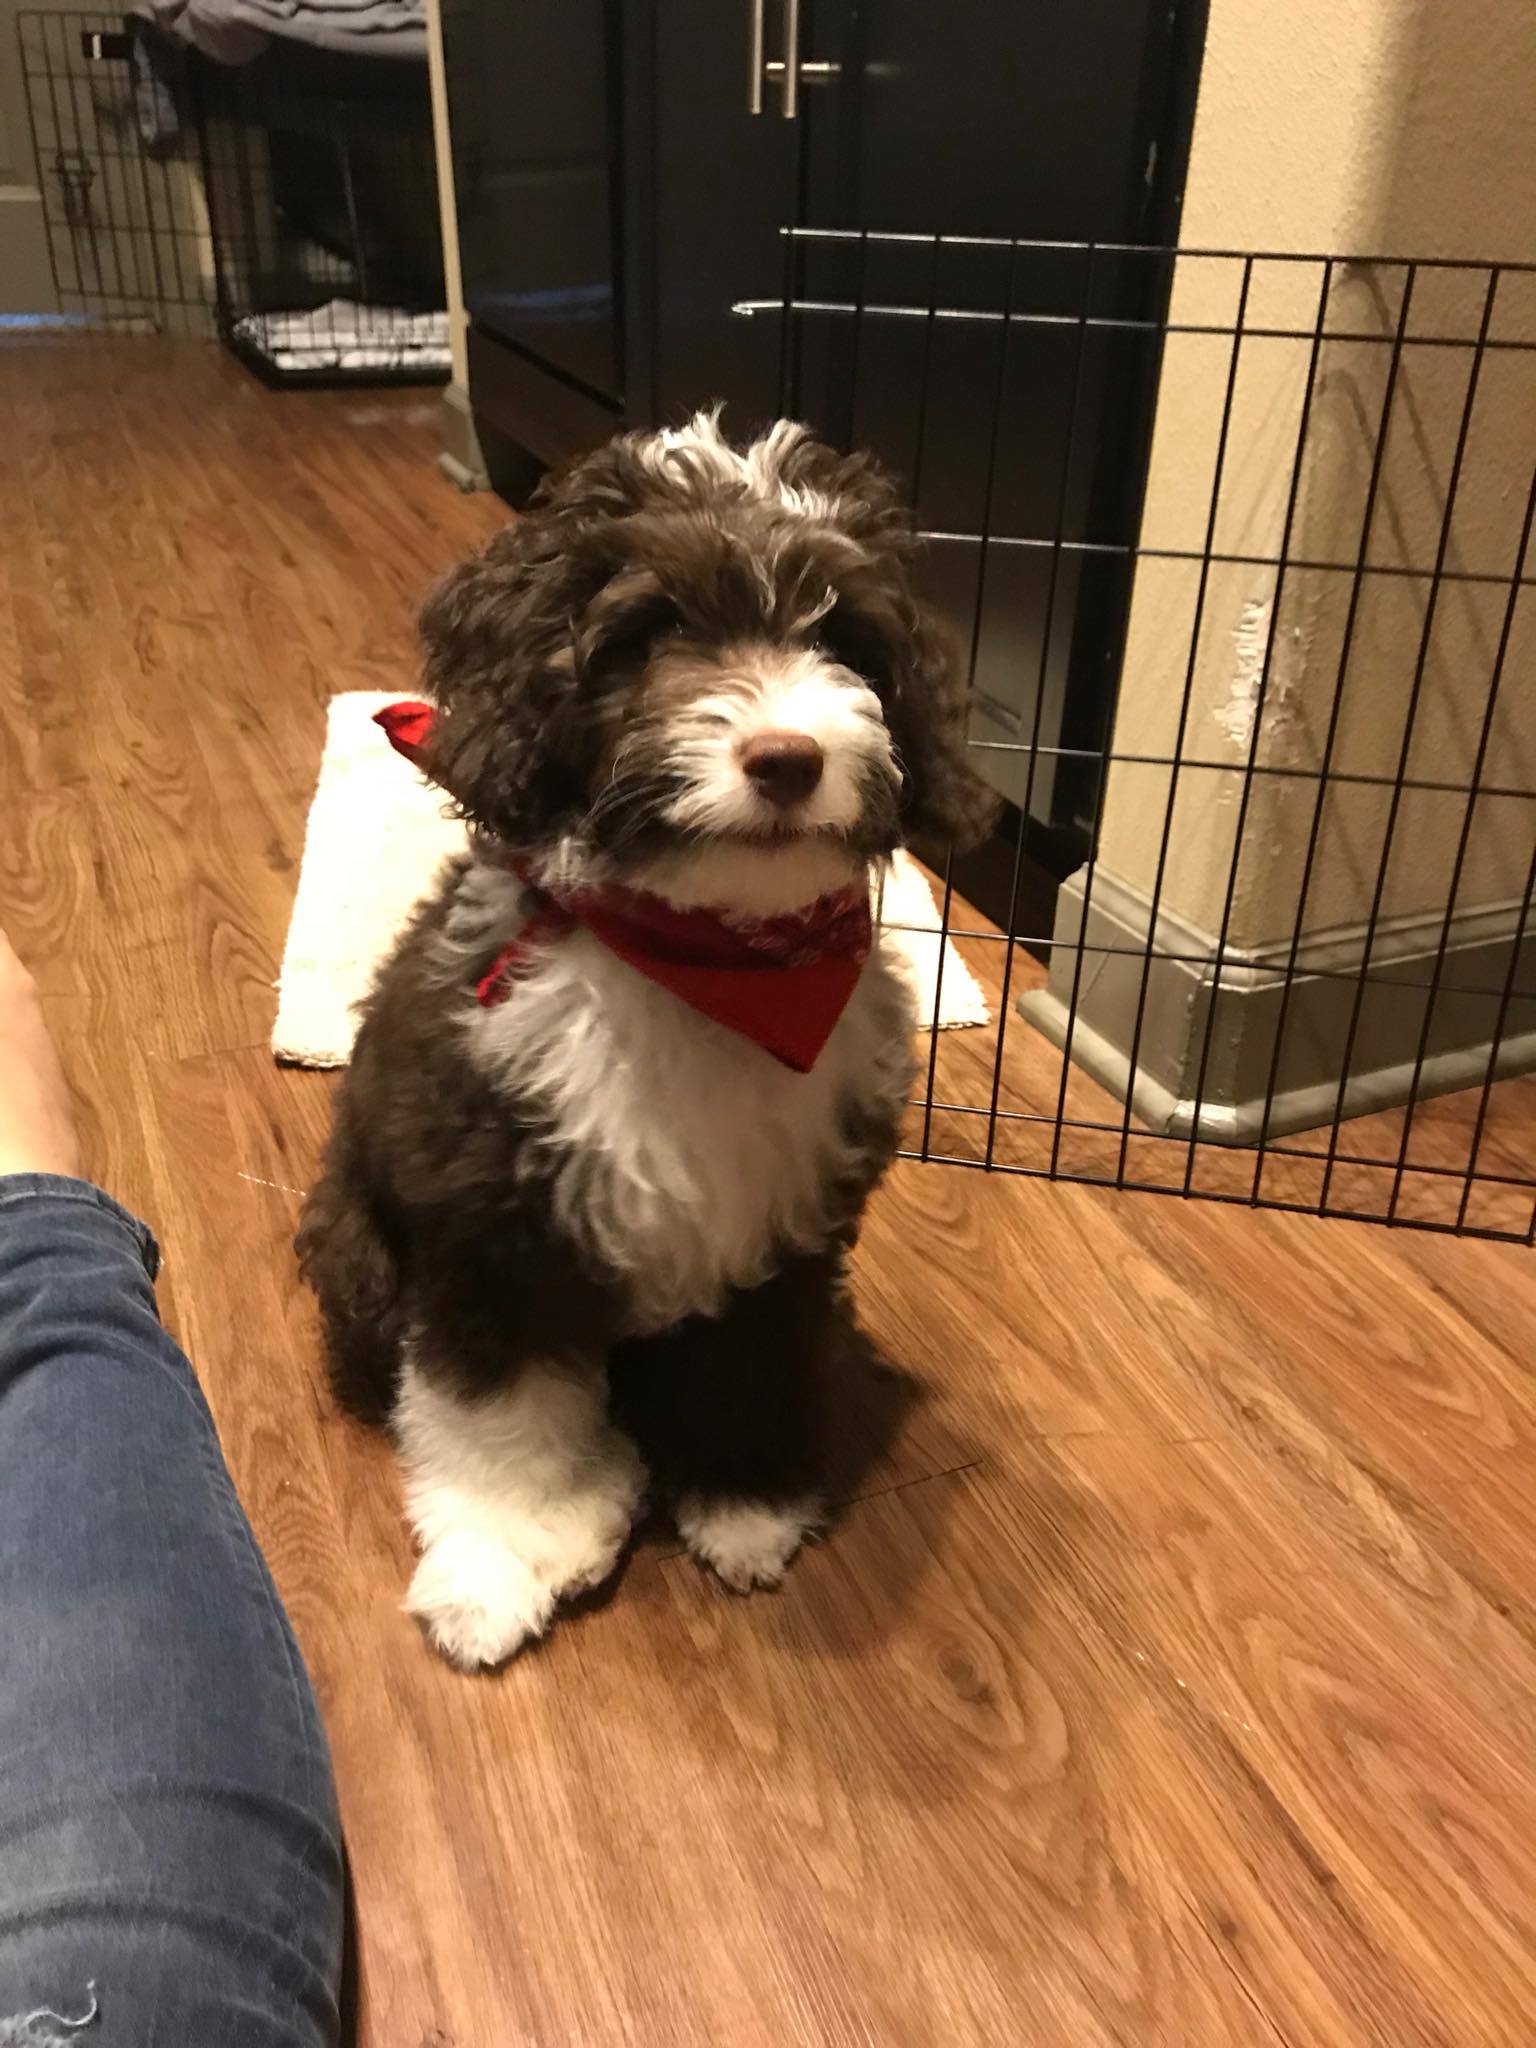 POTTY TRAINING AN AUSSIEDOODLE PUPPY - 7 DAY CRATE TRAINING SCHEDULE- CHOCOLATE AND WHITE BI F1B MINI AUSSIEDOODLE 